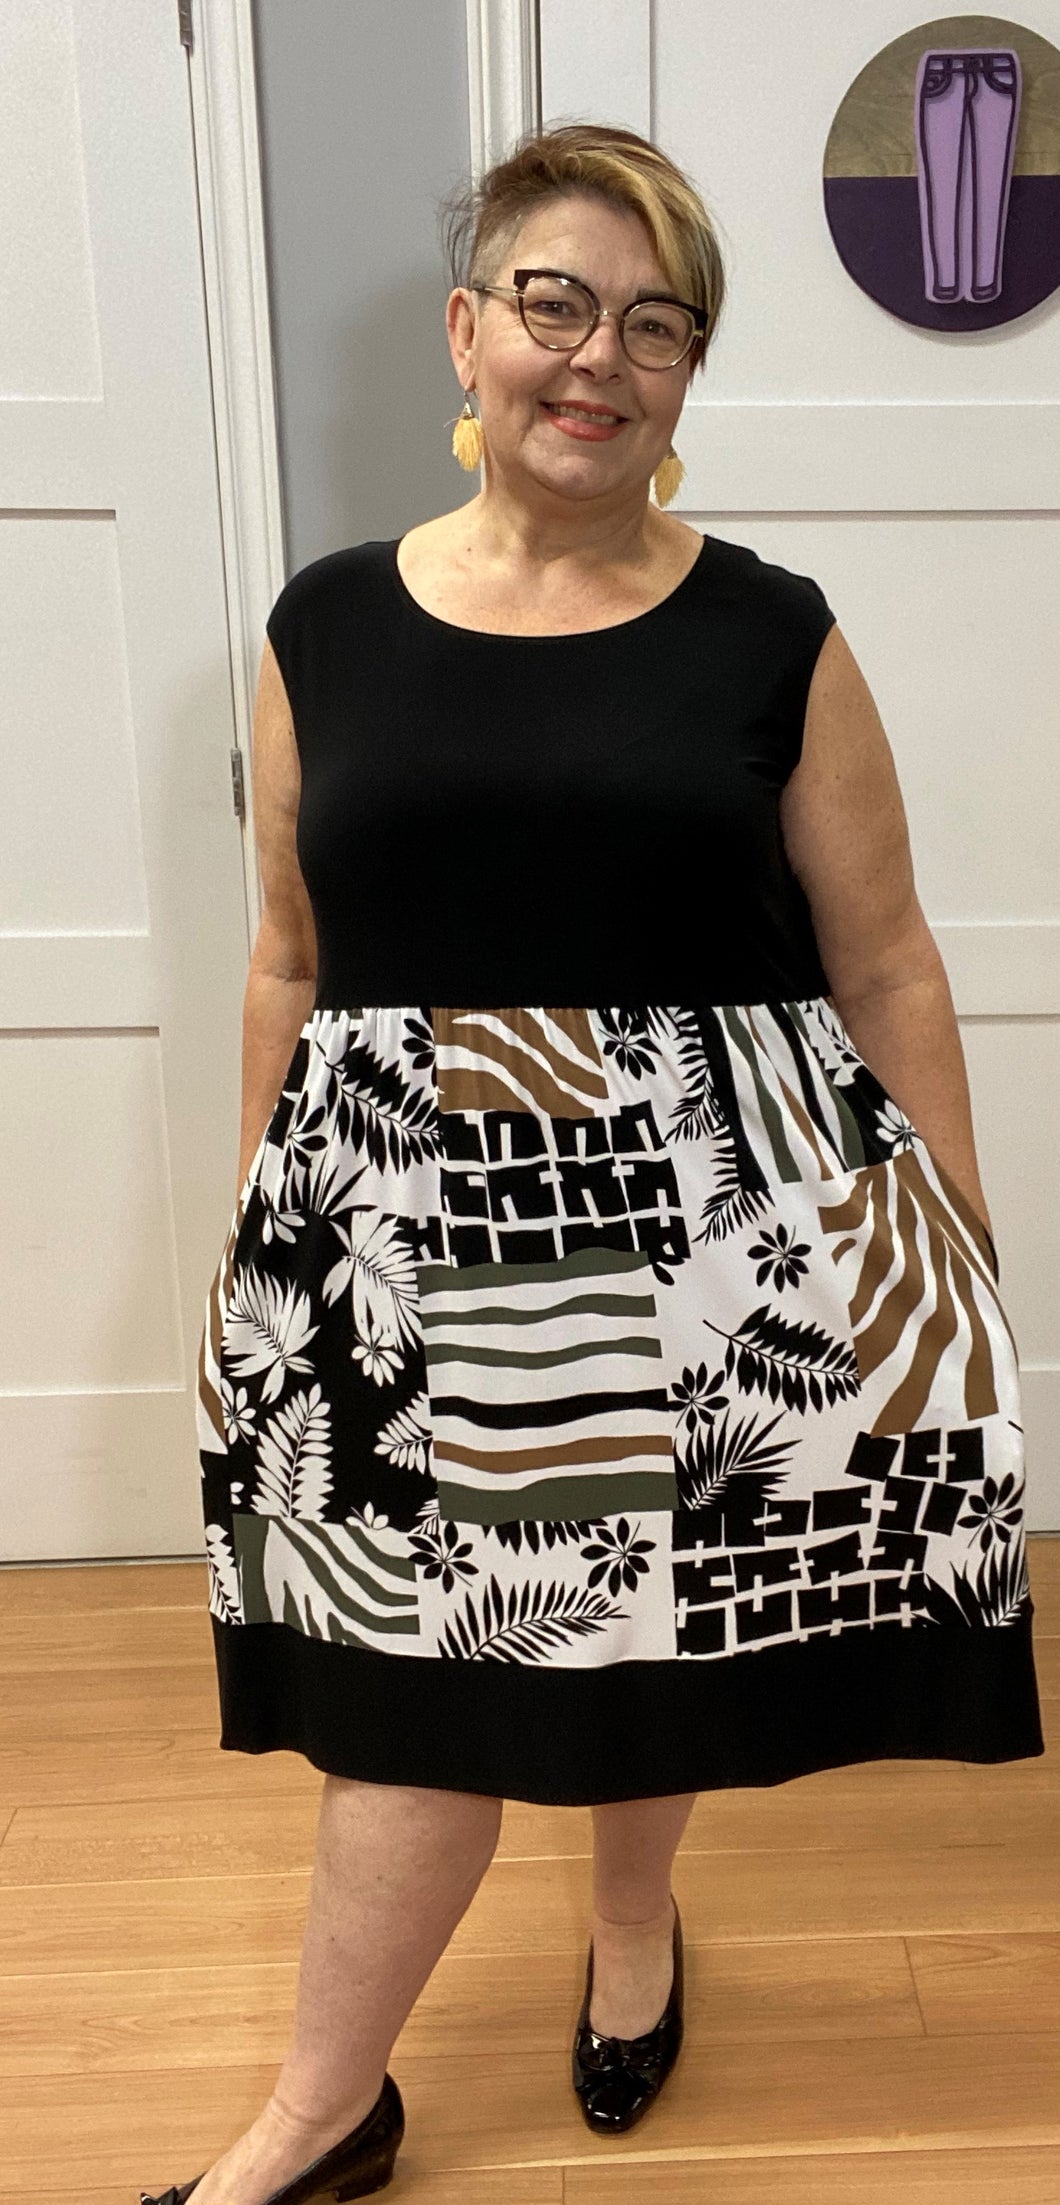 Sleeveless Printed Skirted Dress by Joseph Ribkoff (available in plus sizes)